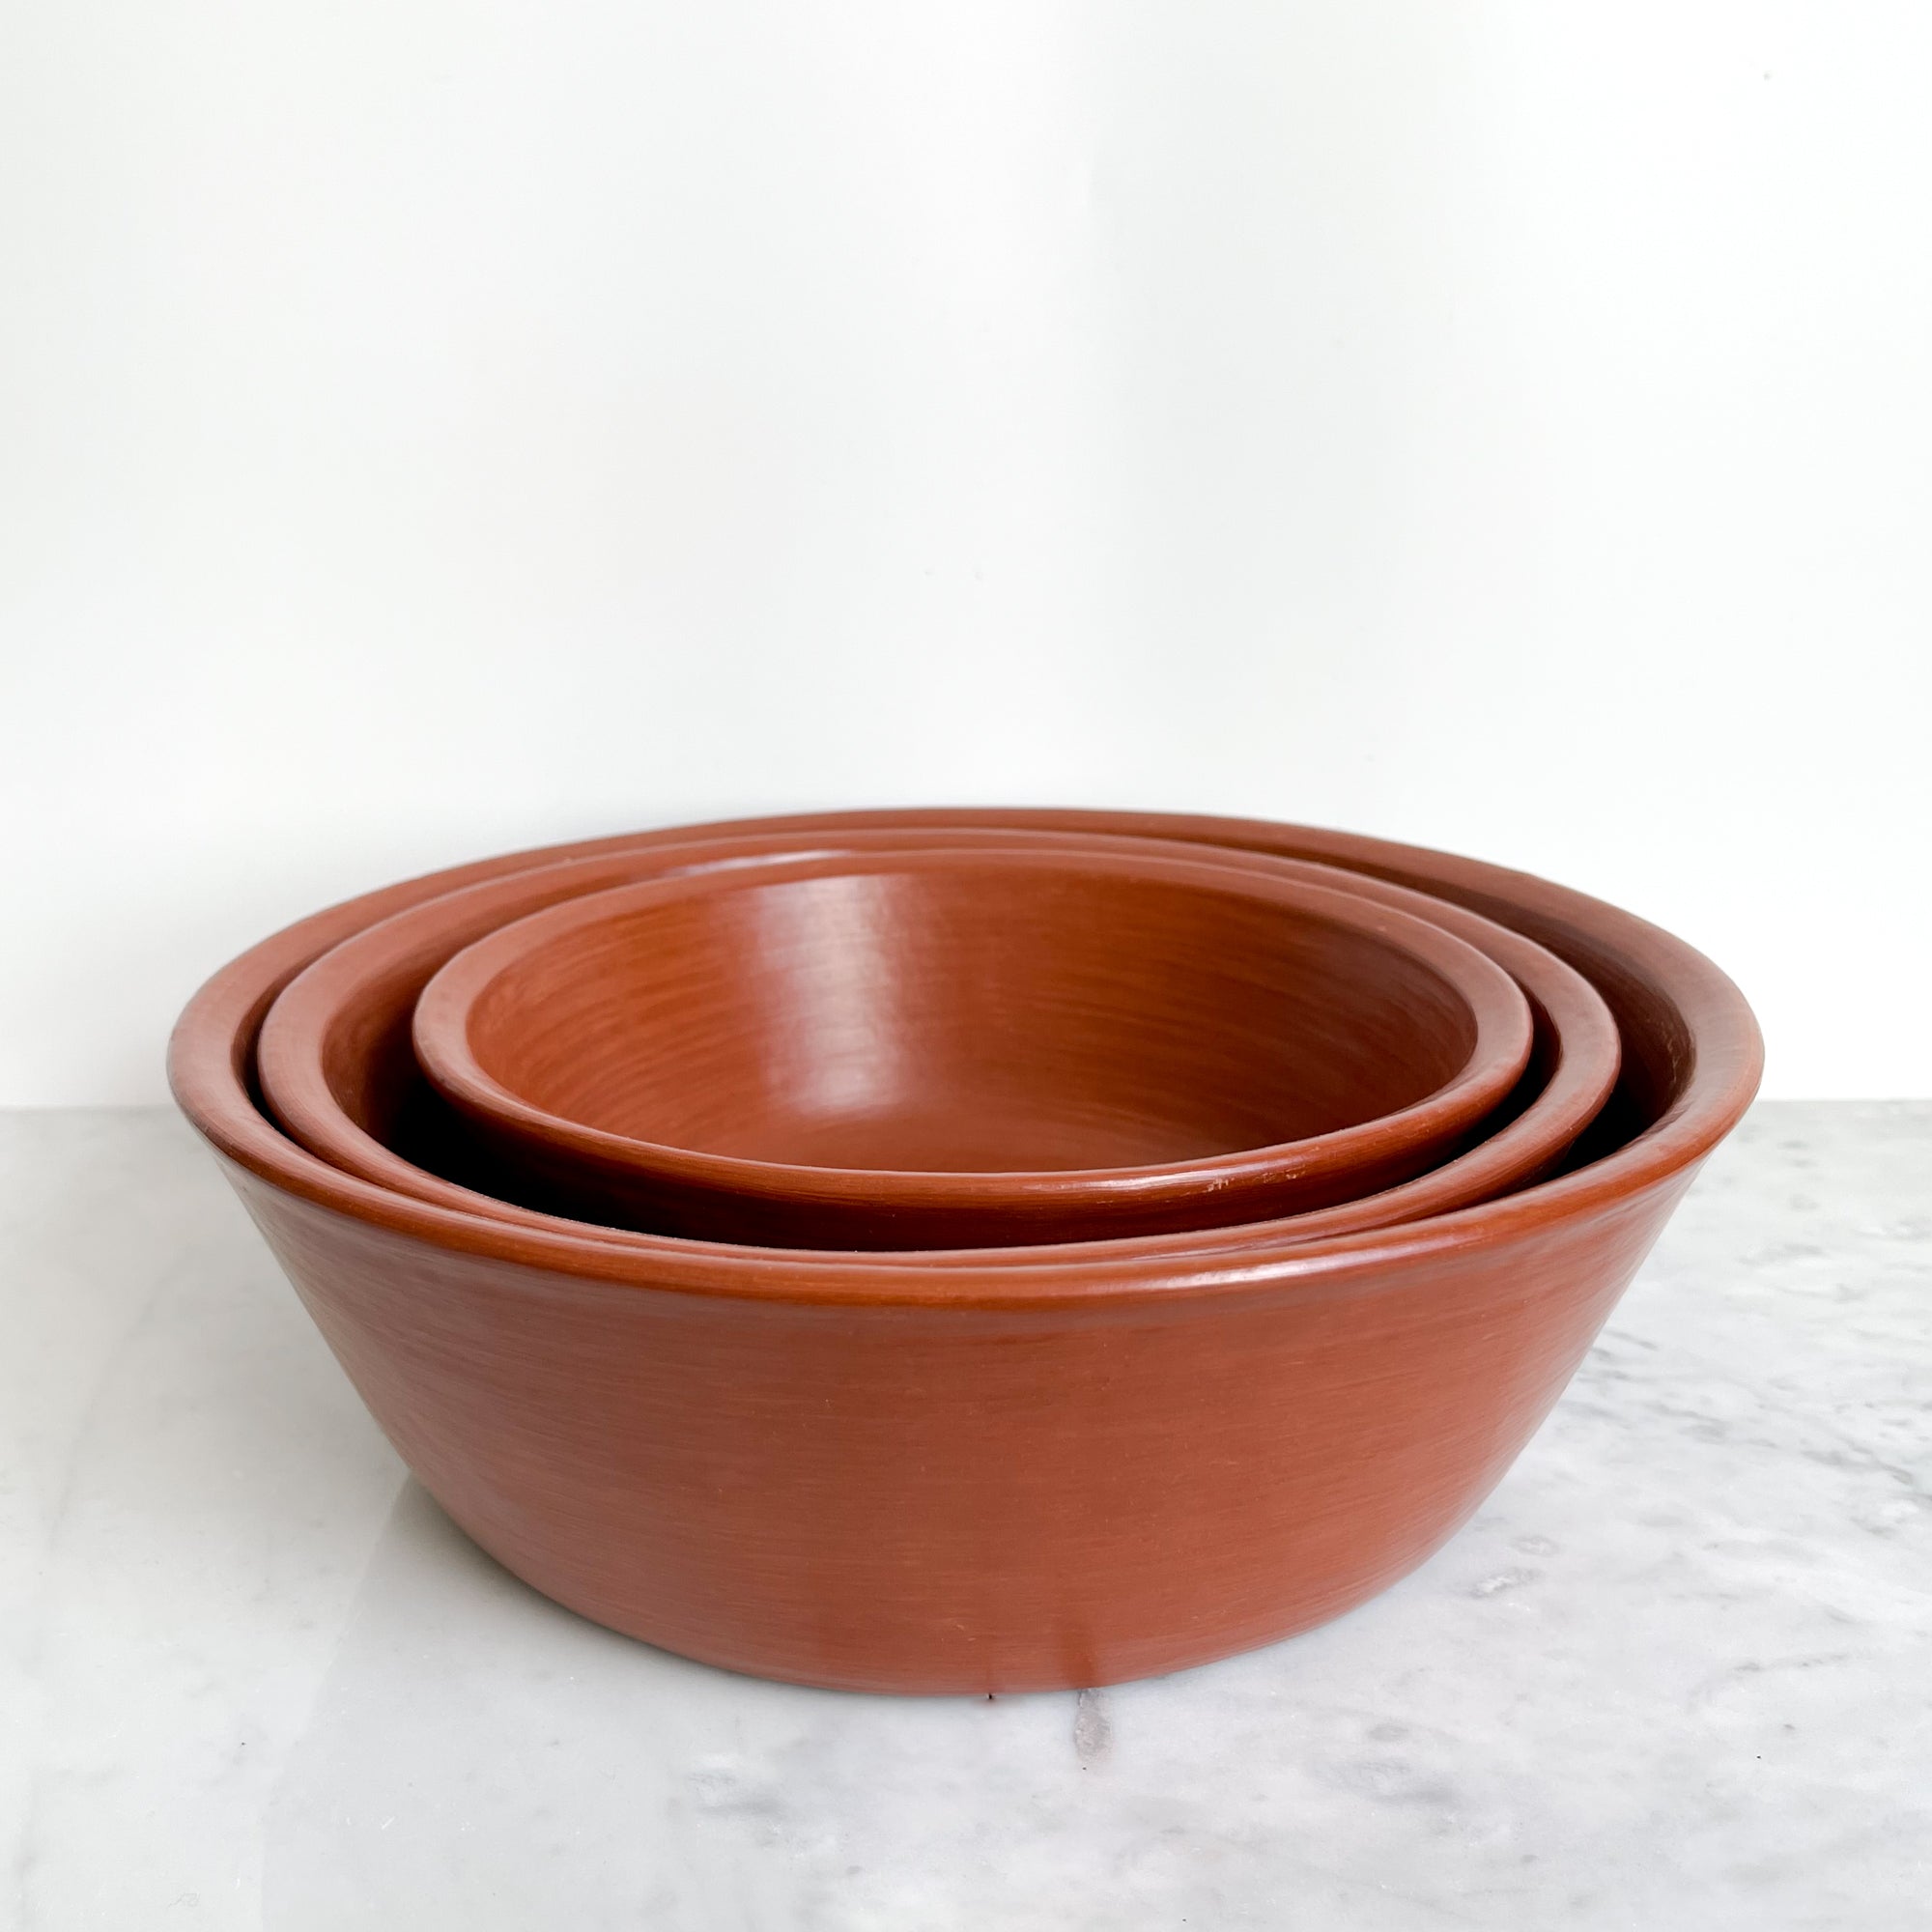 A set of nested red clay serving bowls on a marble counter.